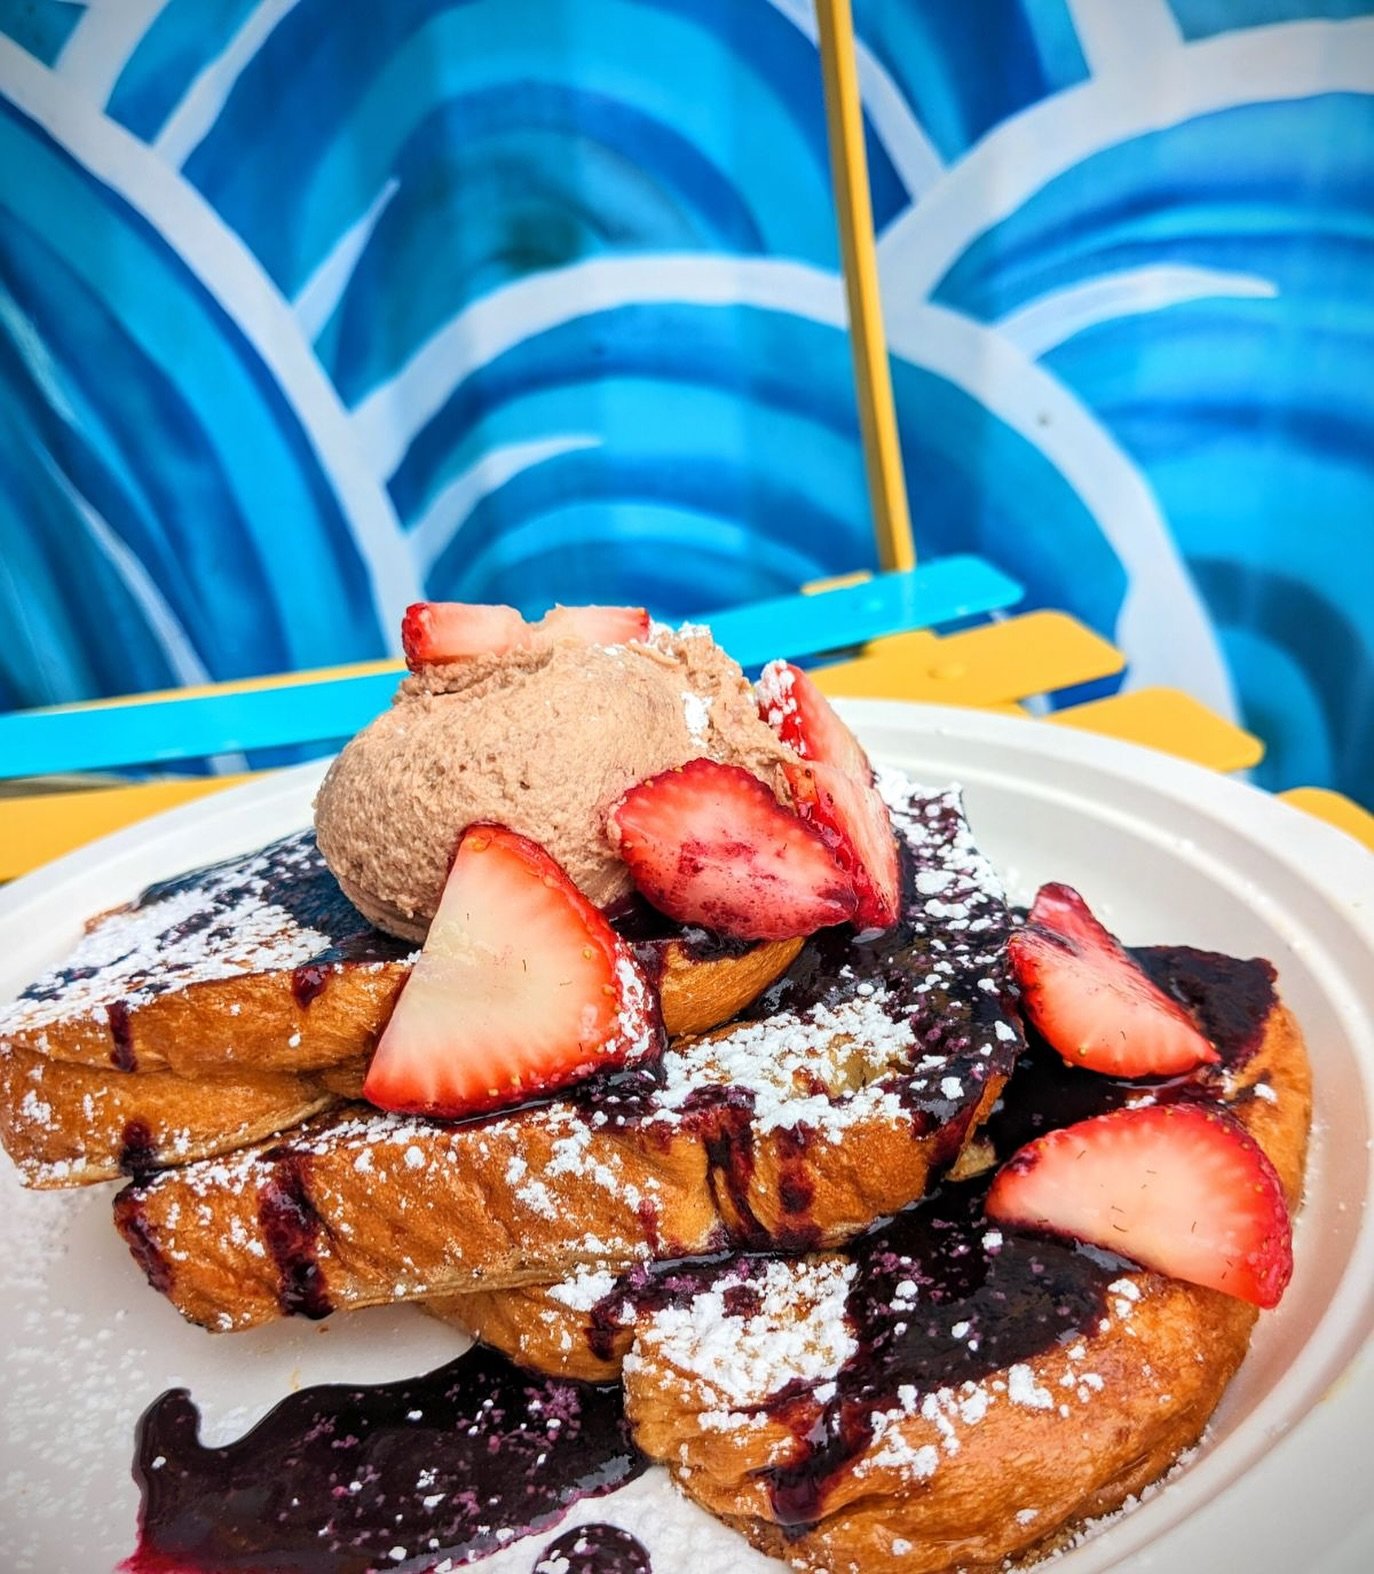 Sunday brunch special: cinnamon french toast! Marinated strawberries, Nutella whipped ricotta &amp; blueberry maple syrup! We&rsquo;re Beatles brunching from 12pm-3pm, with the regular menu until 9pm! 
&bull;
&bull;
&bull;
#sunsetclub #plumisland #no